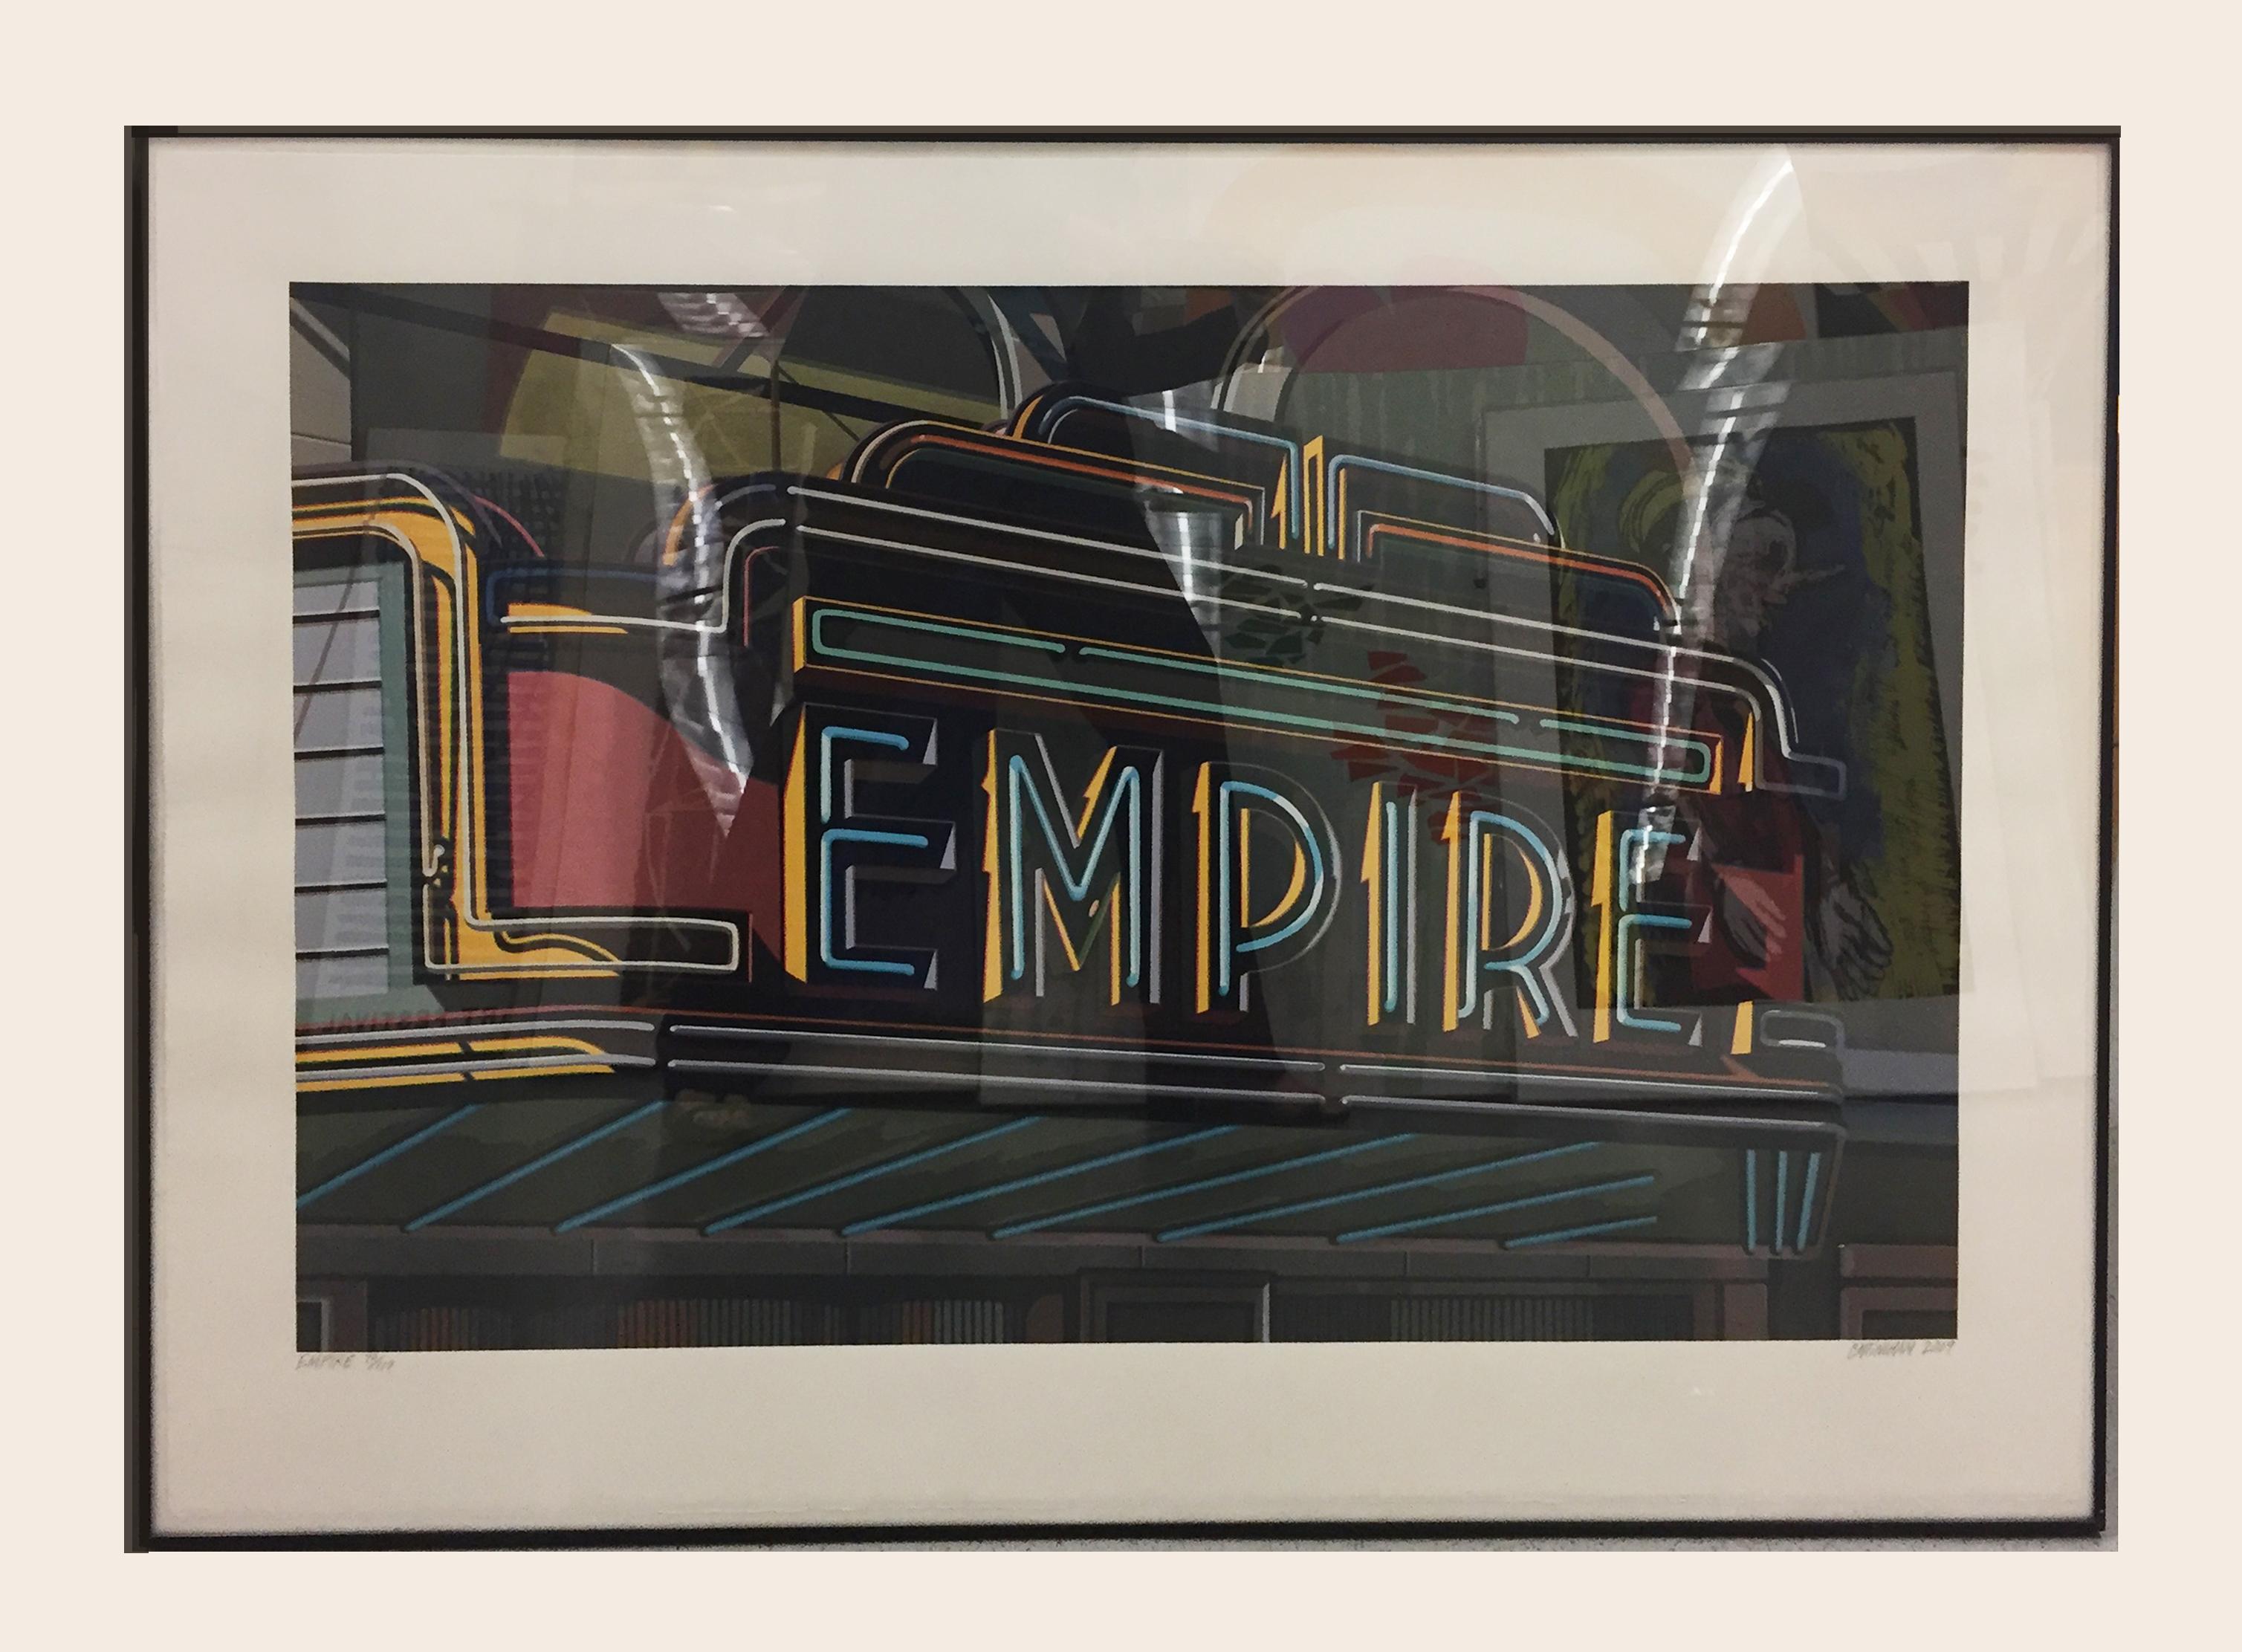 Robert Cottingham is known for imagery that celebrates the history of communications in America, specifically neon signage on urban storefronts and signs on railroad cars.

In 2008, Lincoln Center commissioned Robert Cottingham to commemorate the